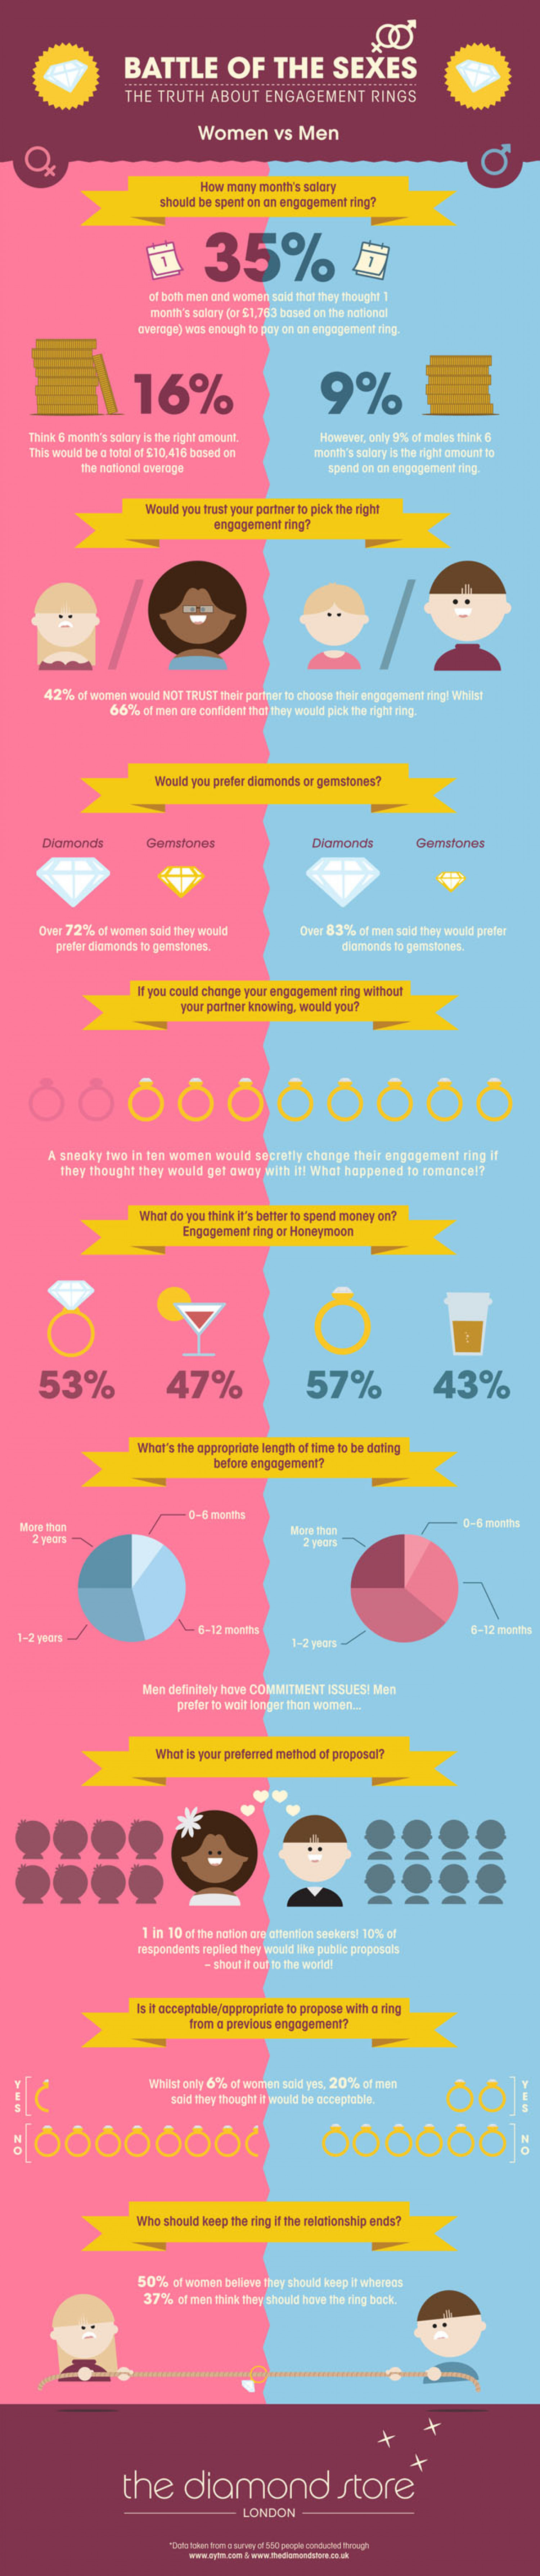 Battle of the Sexes - The Truth About Engagement Rings Infographic